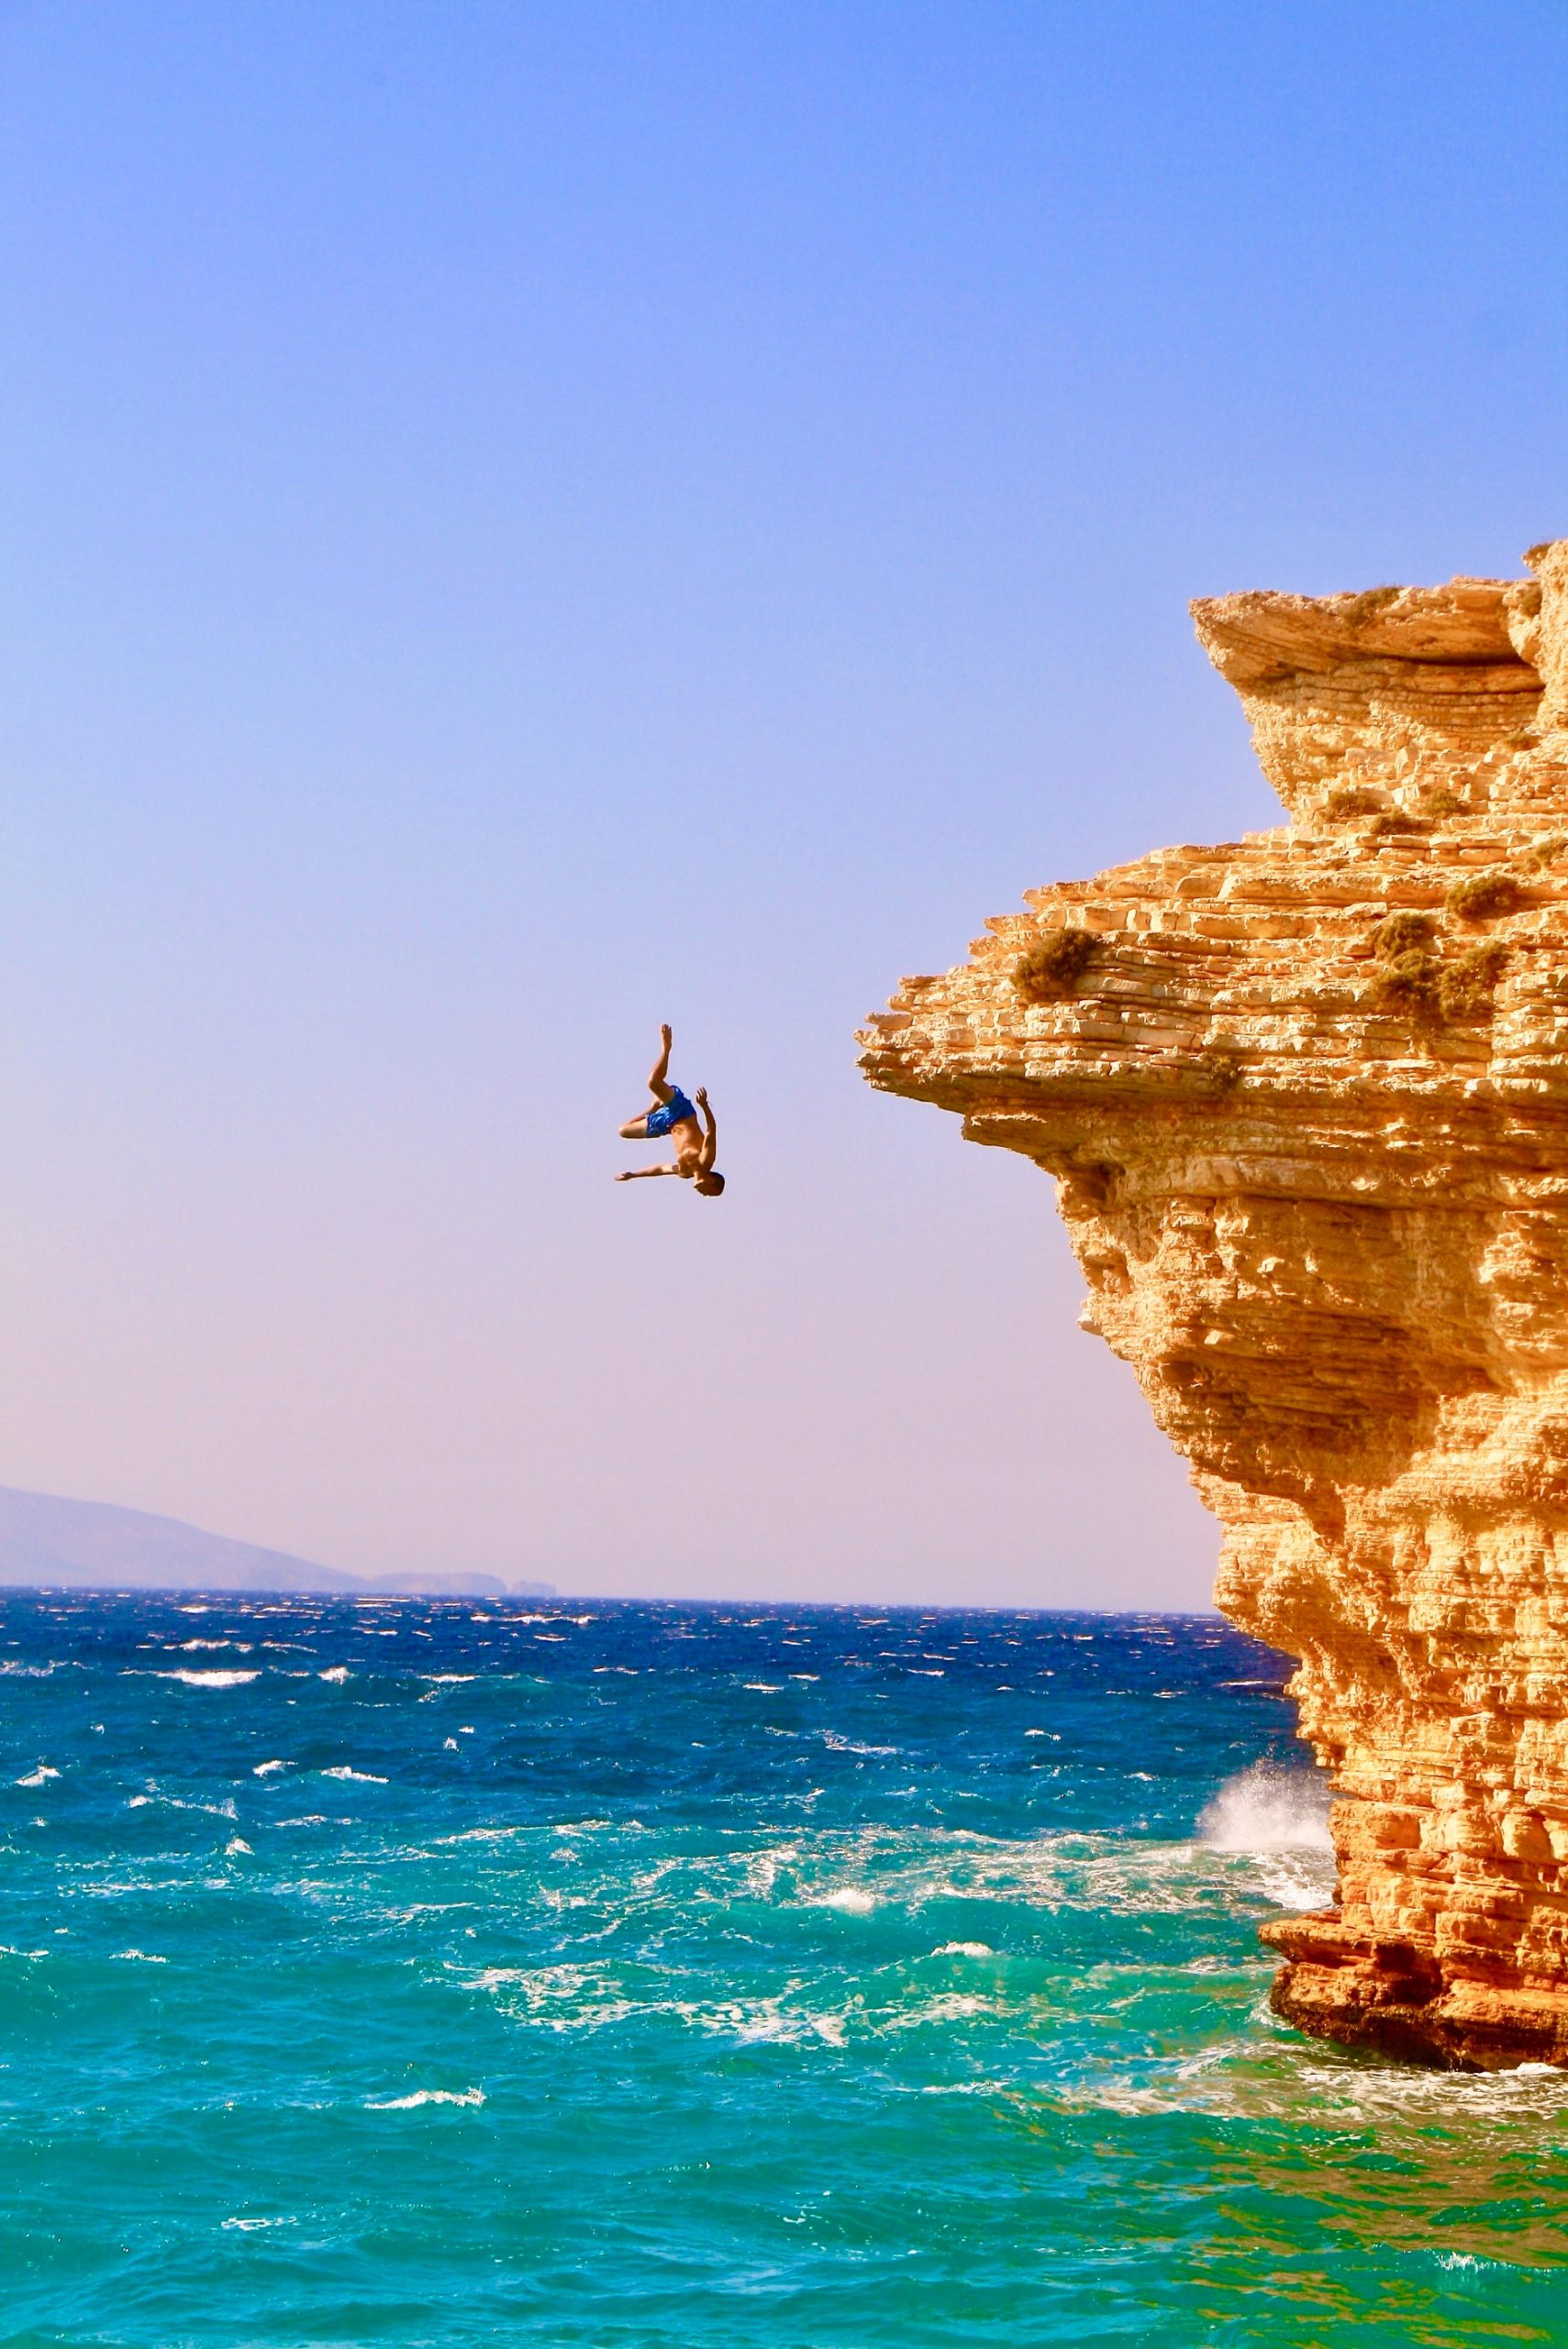 A person cliff diving into the ocean